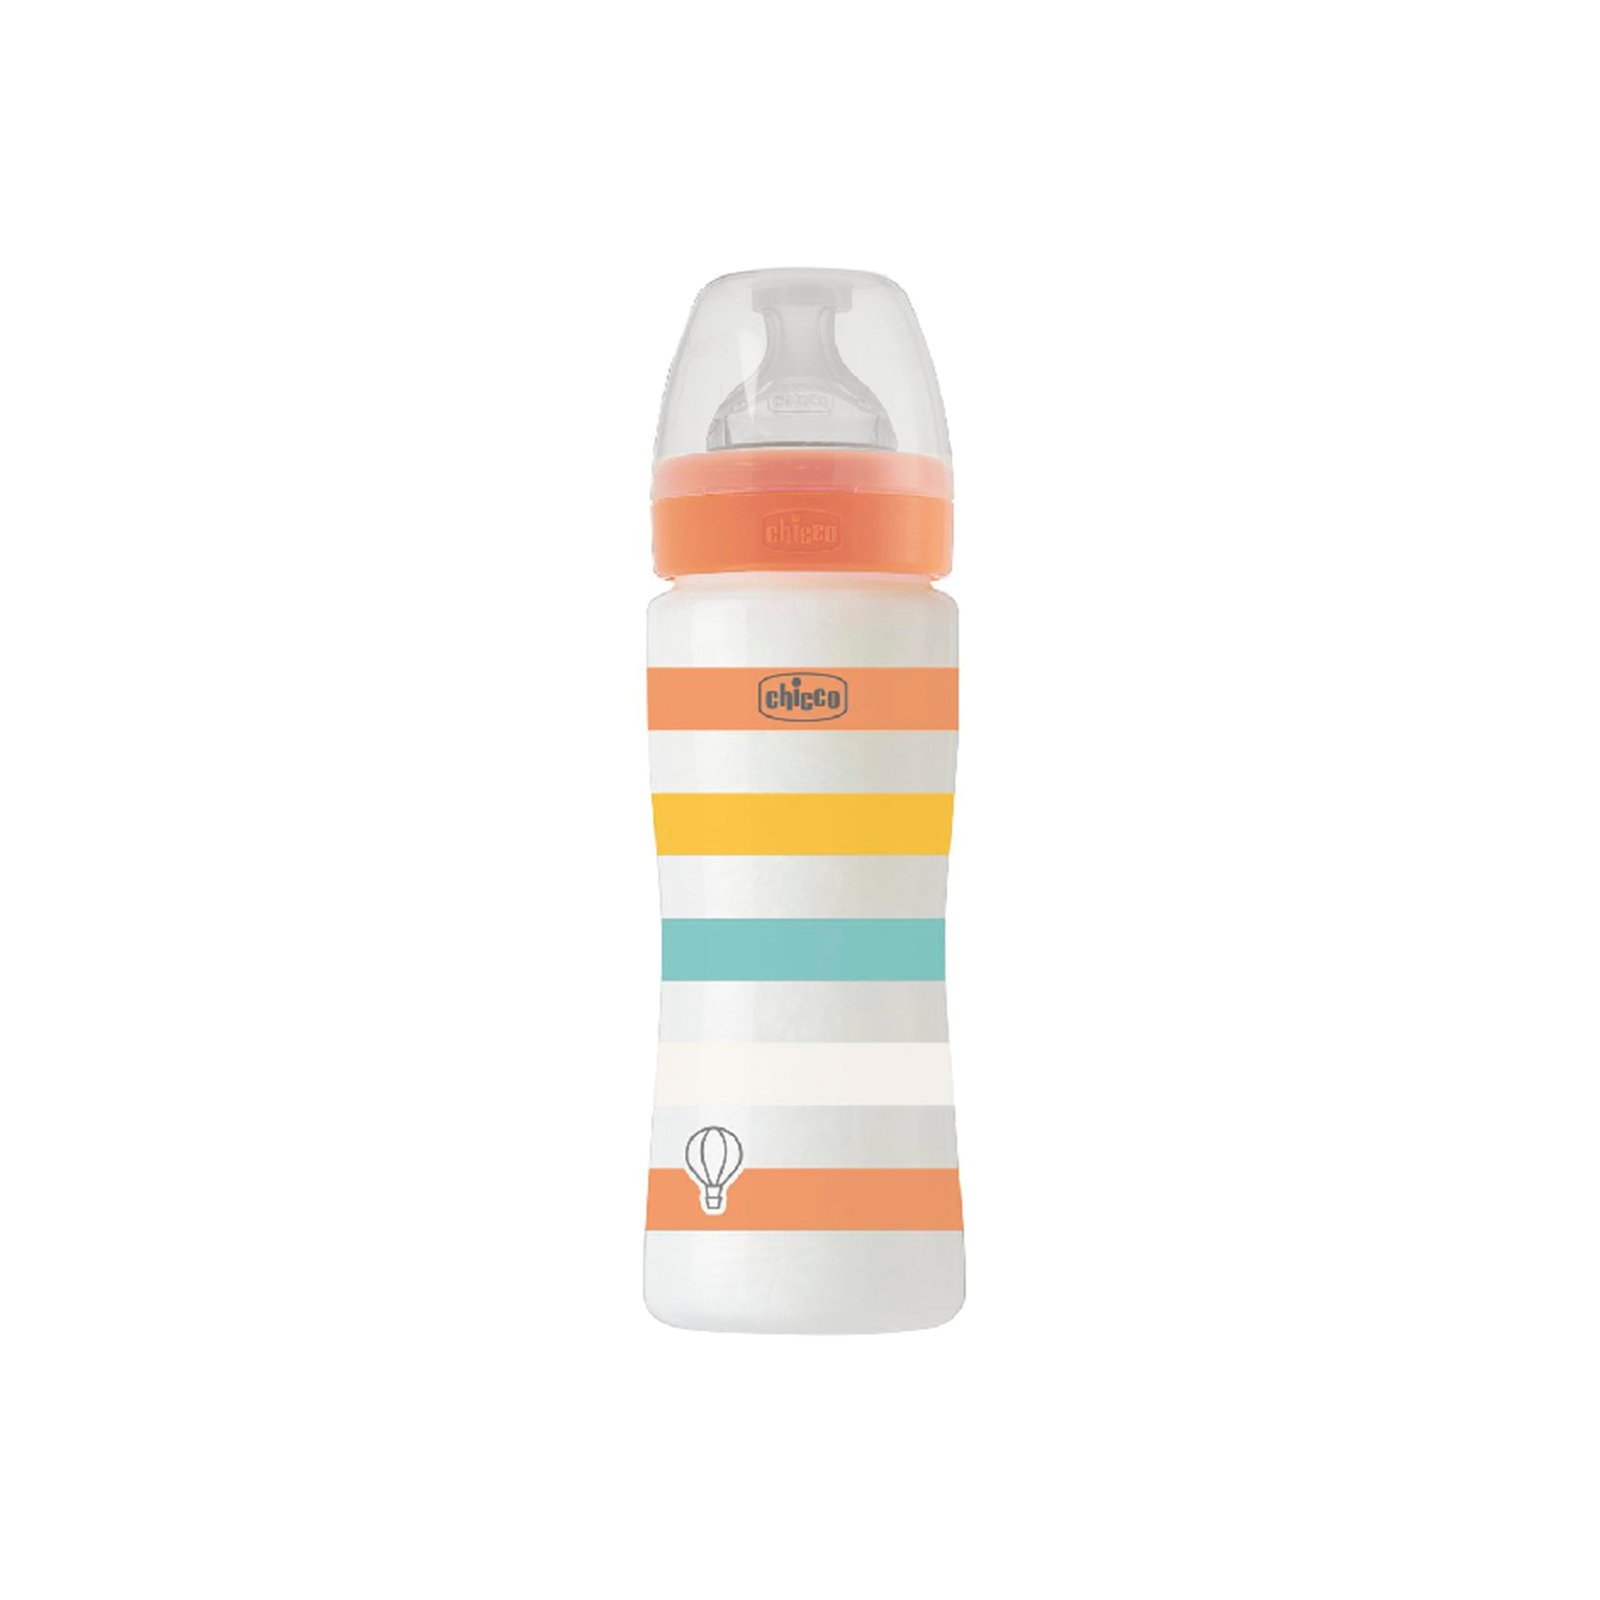 https://static.beautytocare.com/cdn-cgi/image/width=1600,height=1600,f=auto/media/catalog/product//c/h/chicco-well-being-colors-bottle-4m-orange-330ml_1.jpg